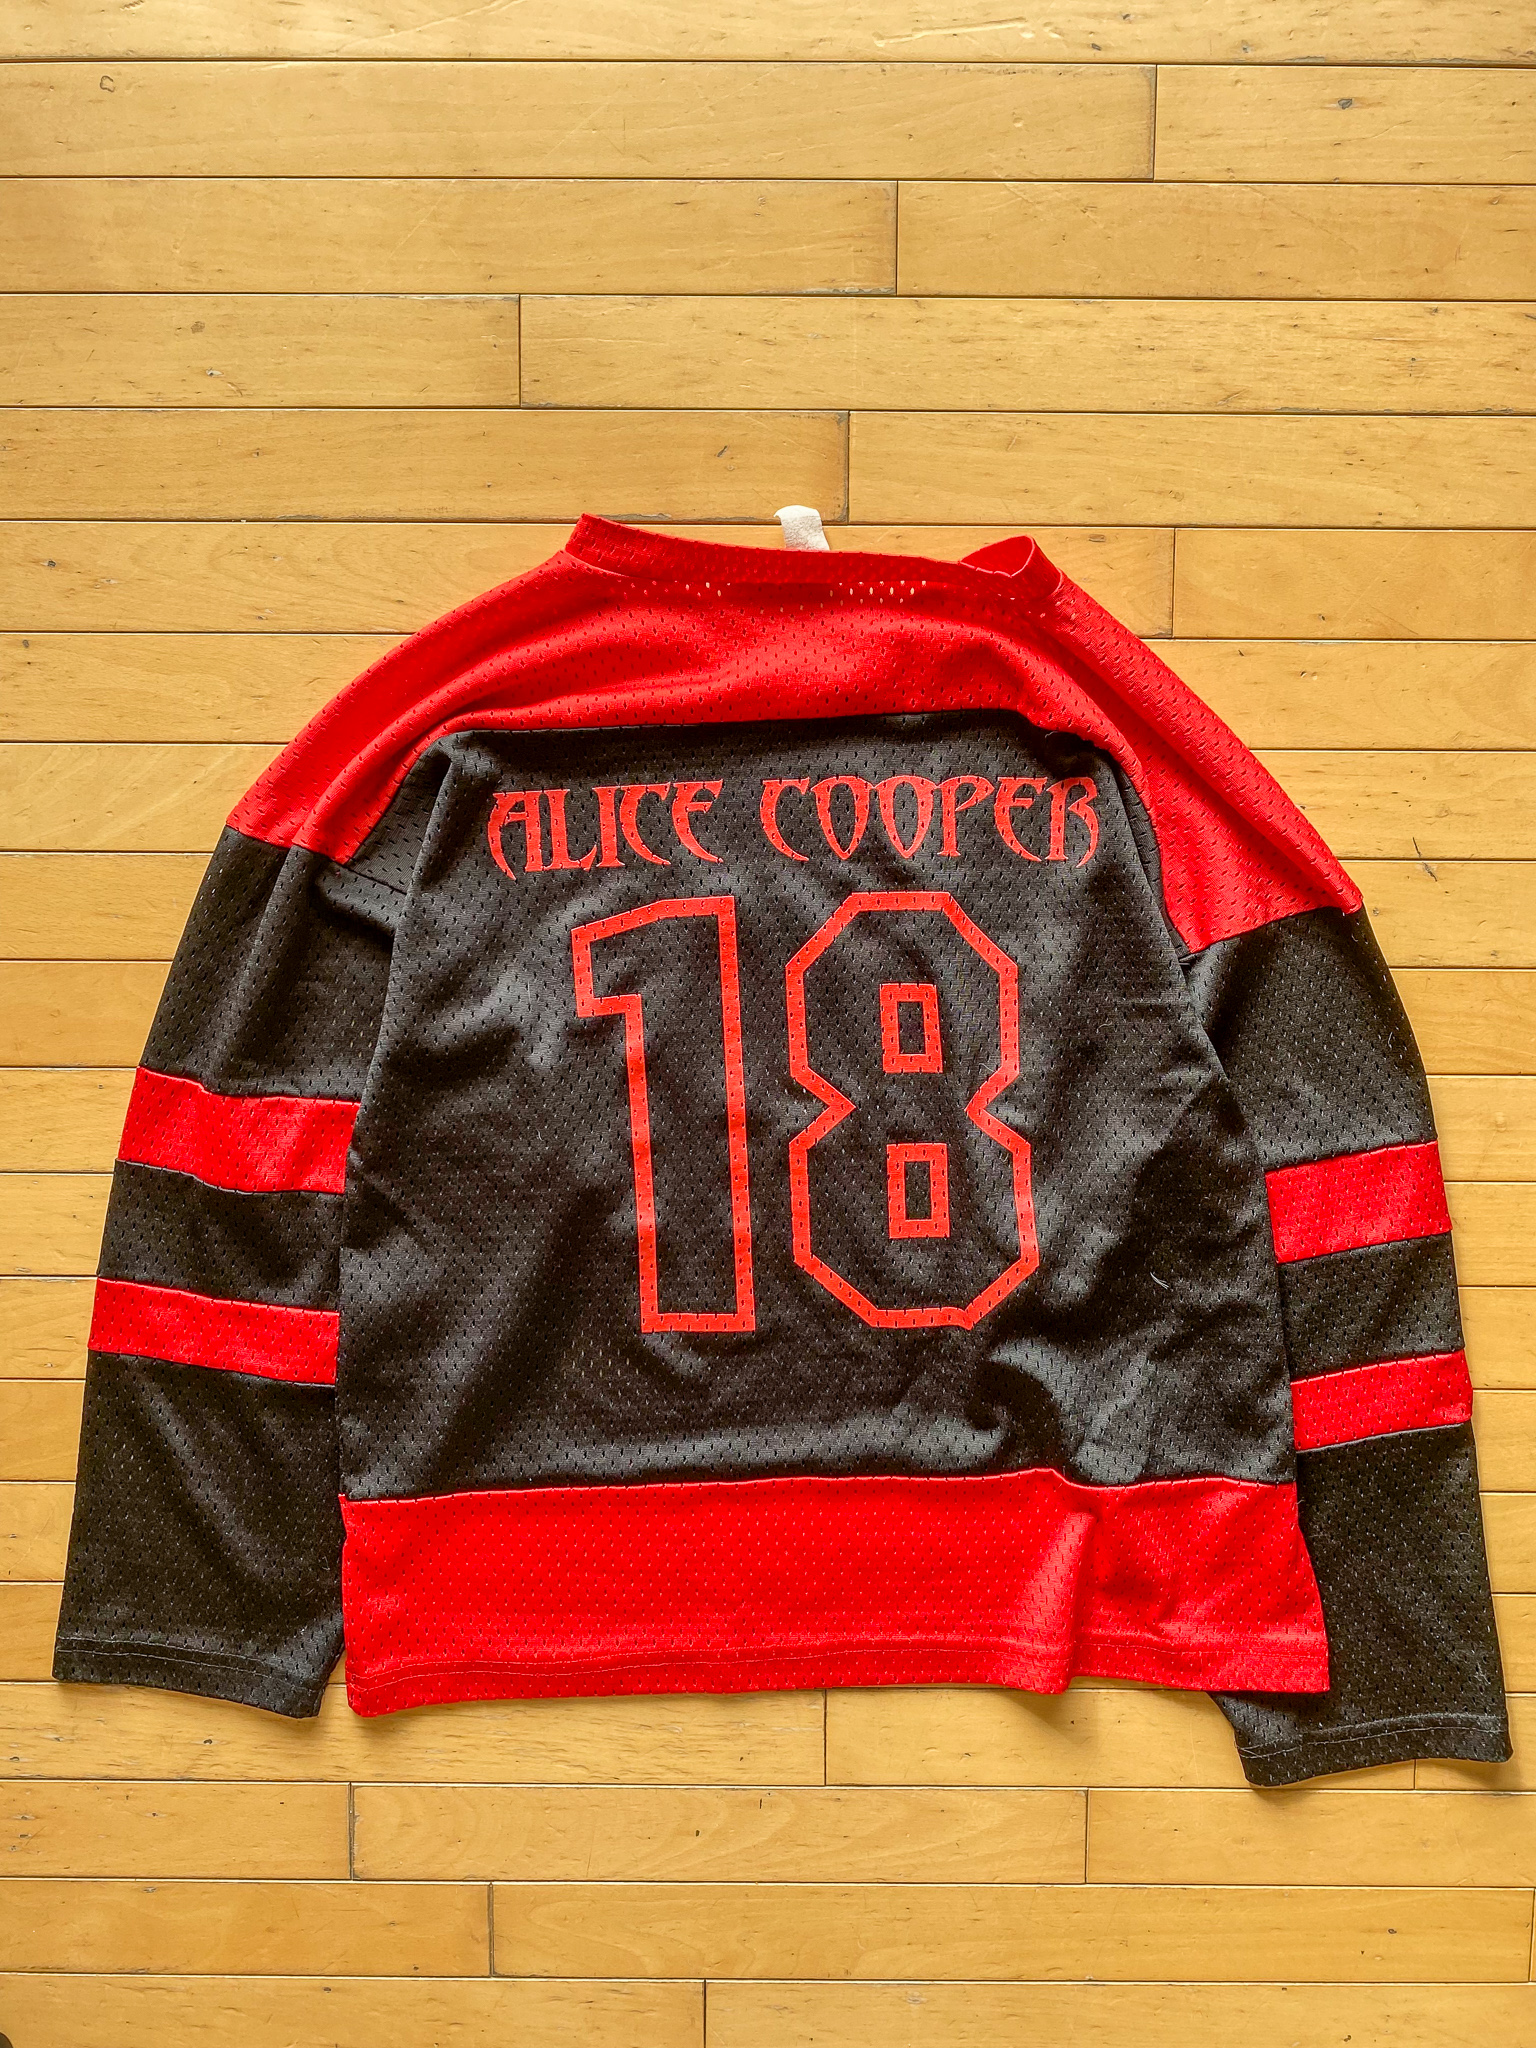 Alice Cooper 'The Spiders' Hockey Jersey, Black/Red/White / L